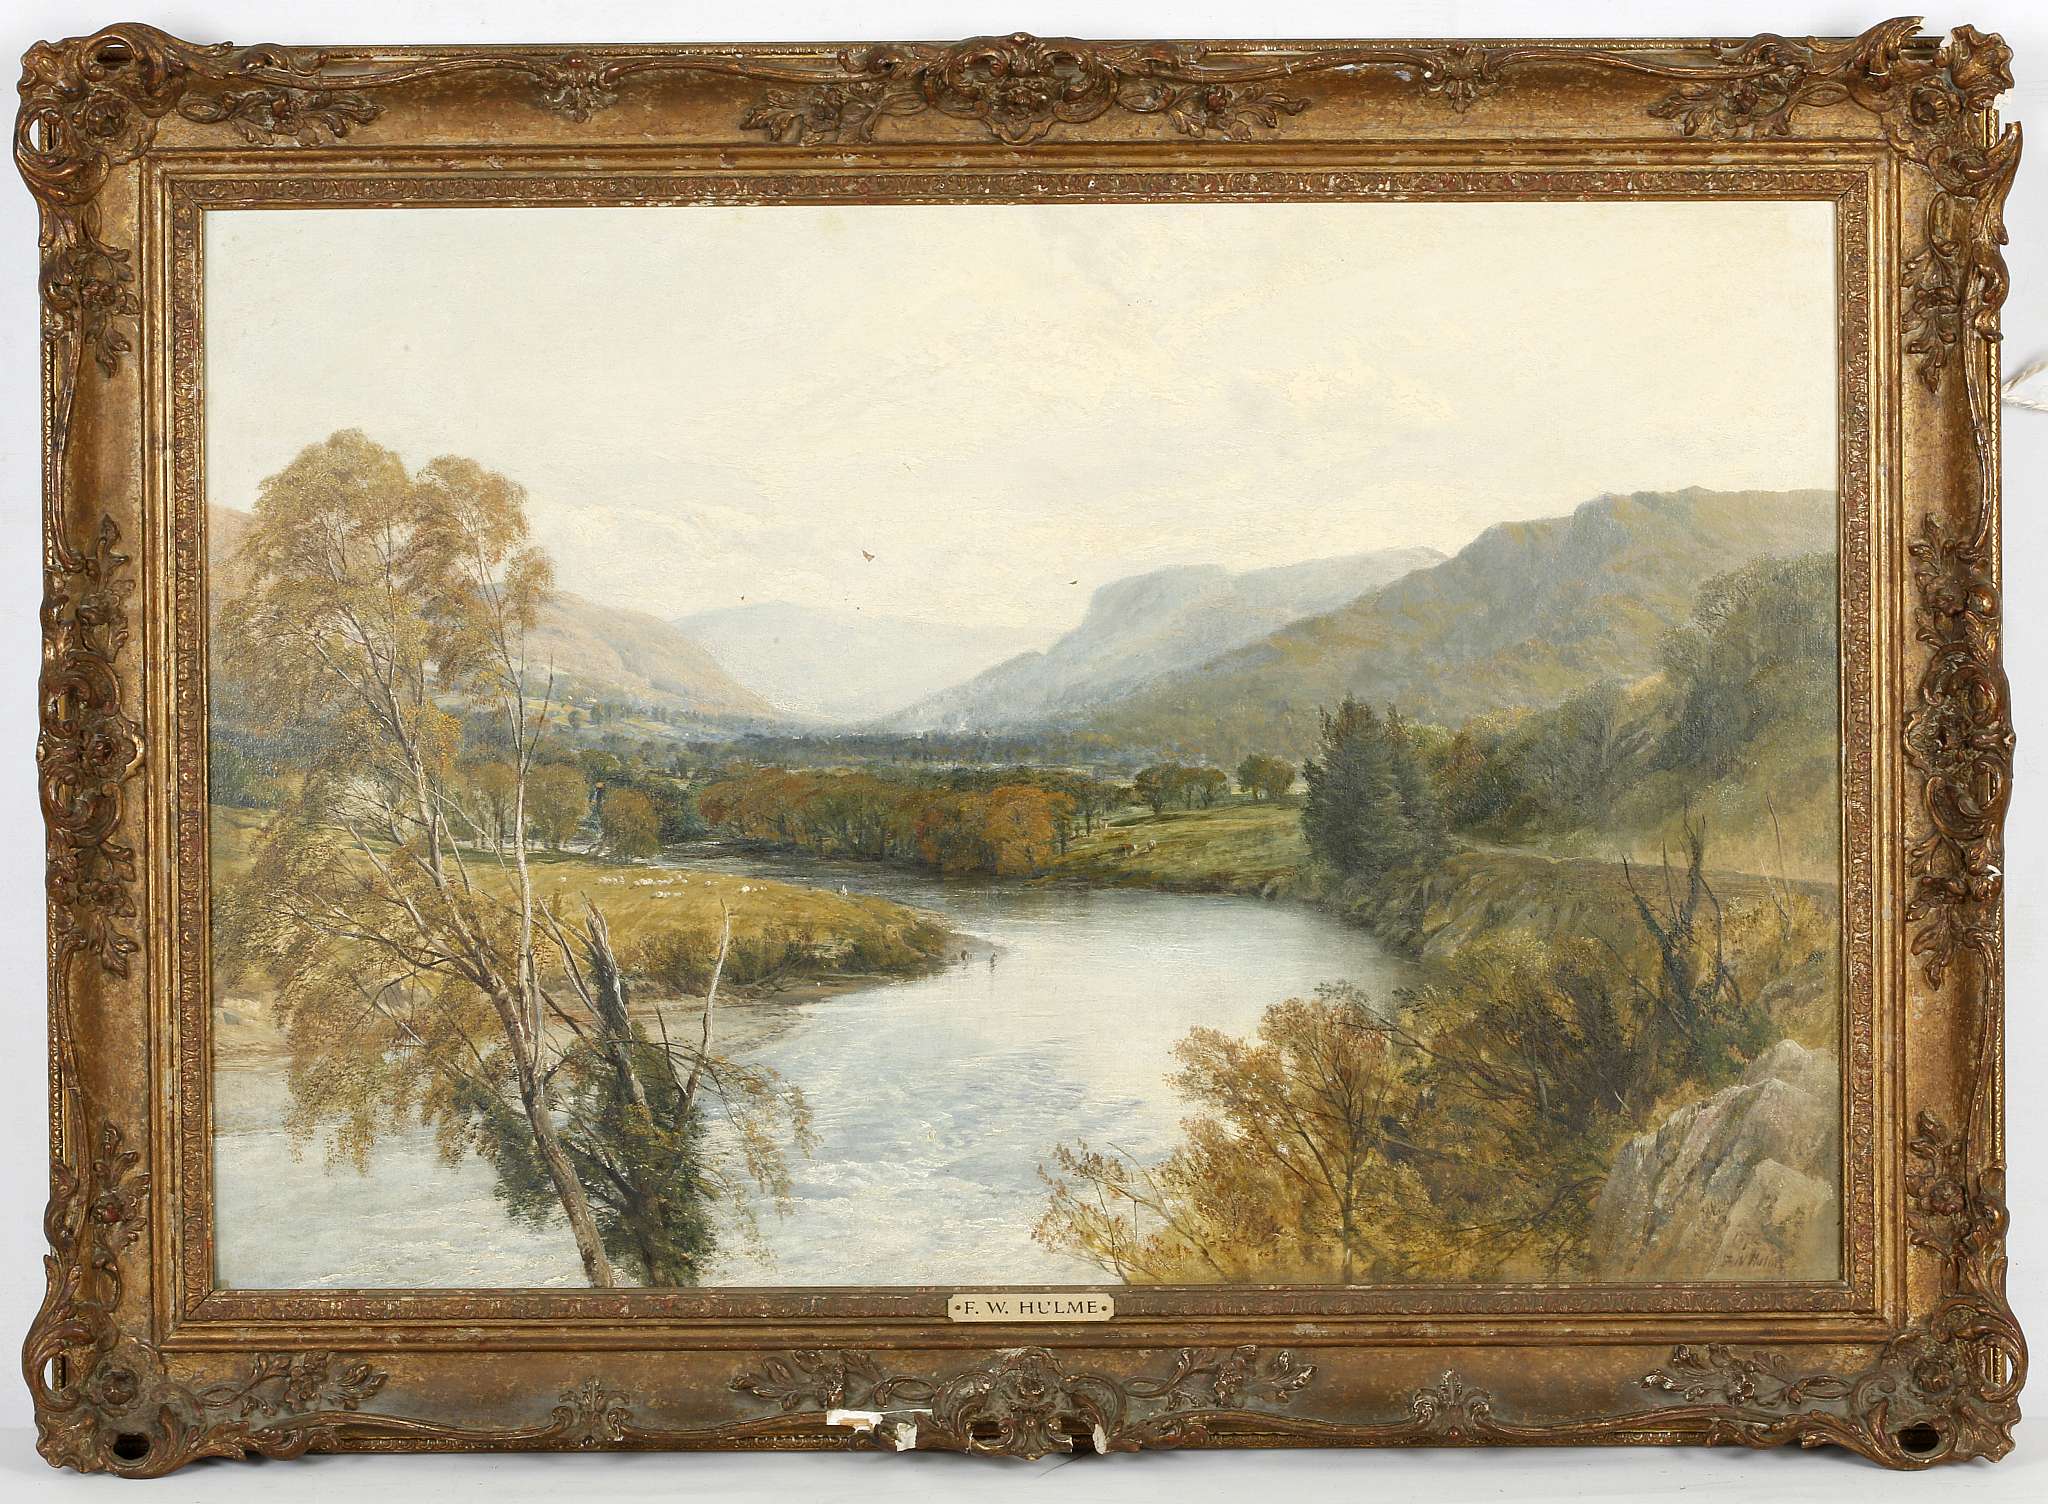 Frederick William Hulme 1816-1884, 'River Landscape', oil on canvas, signed lower right and dated